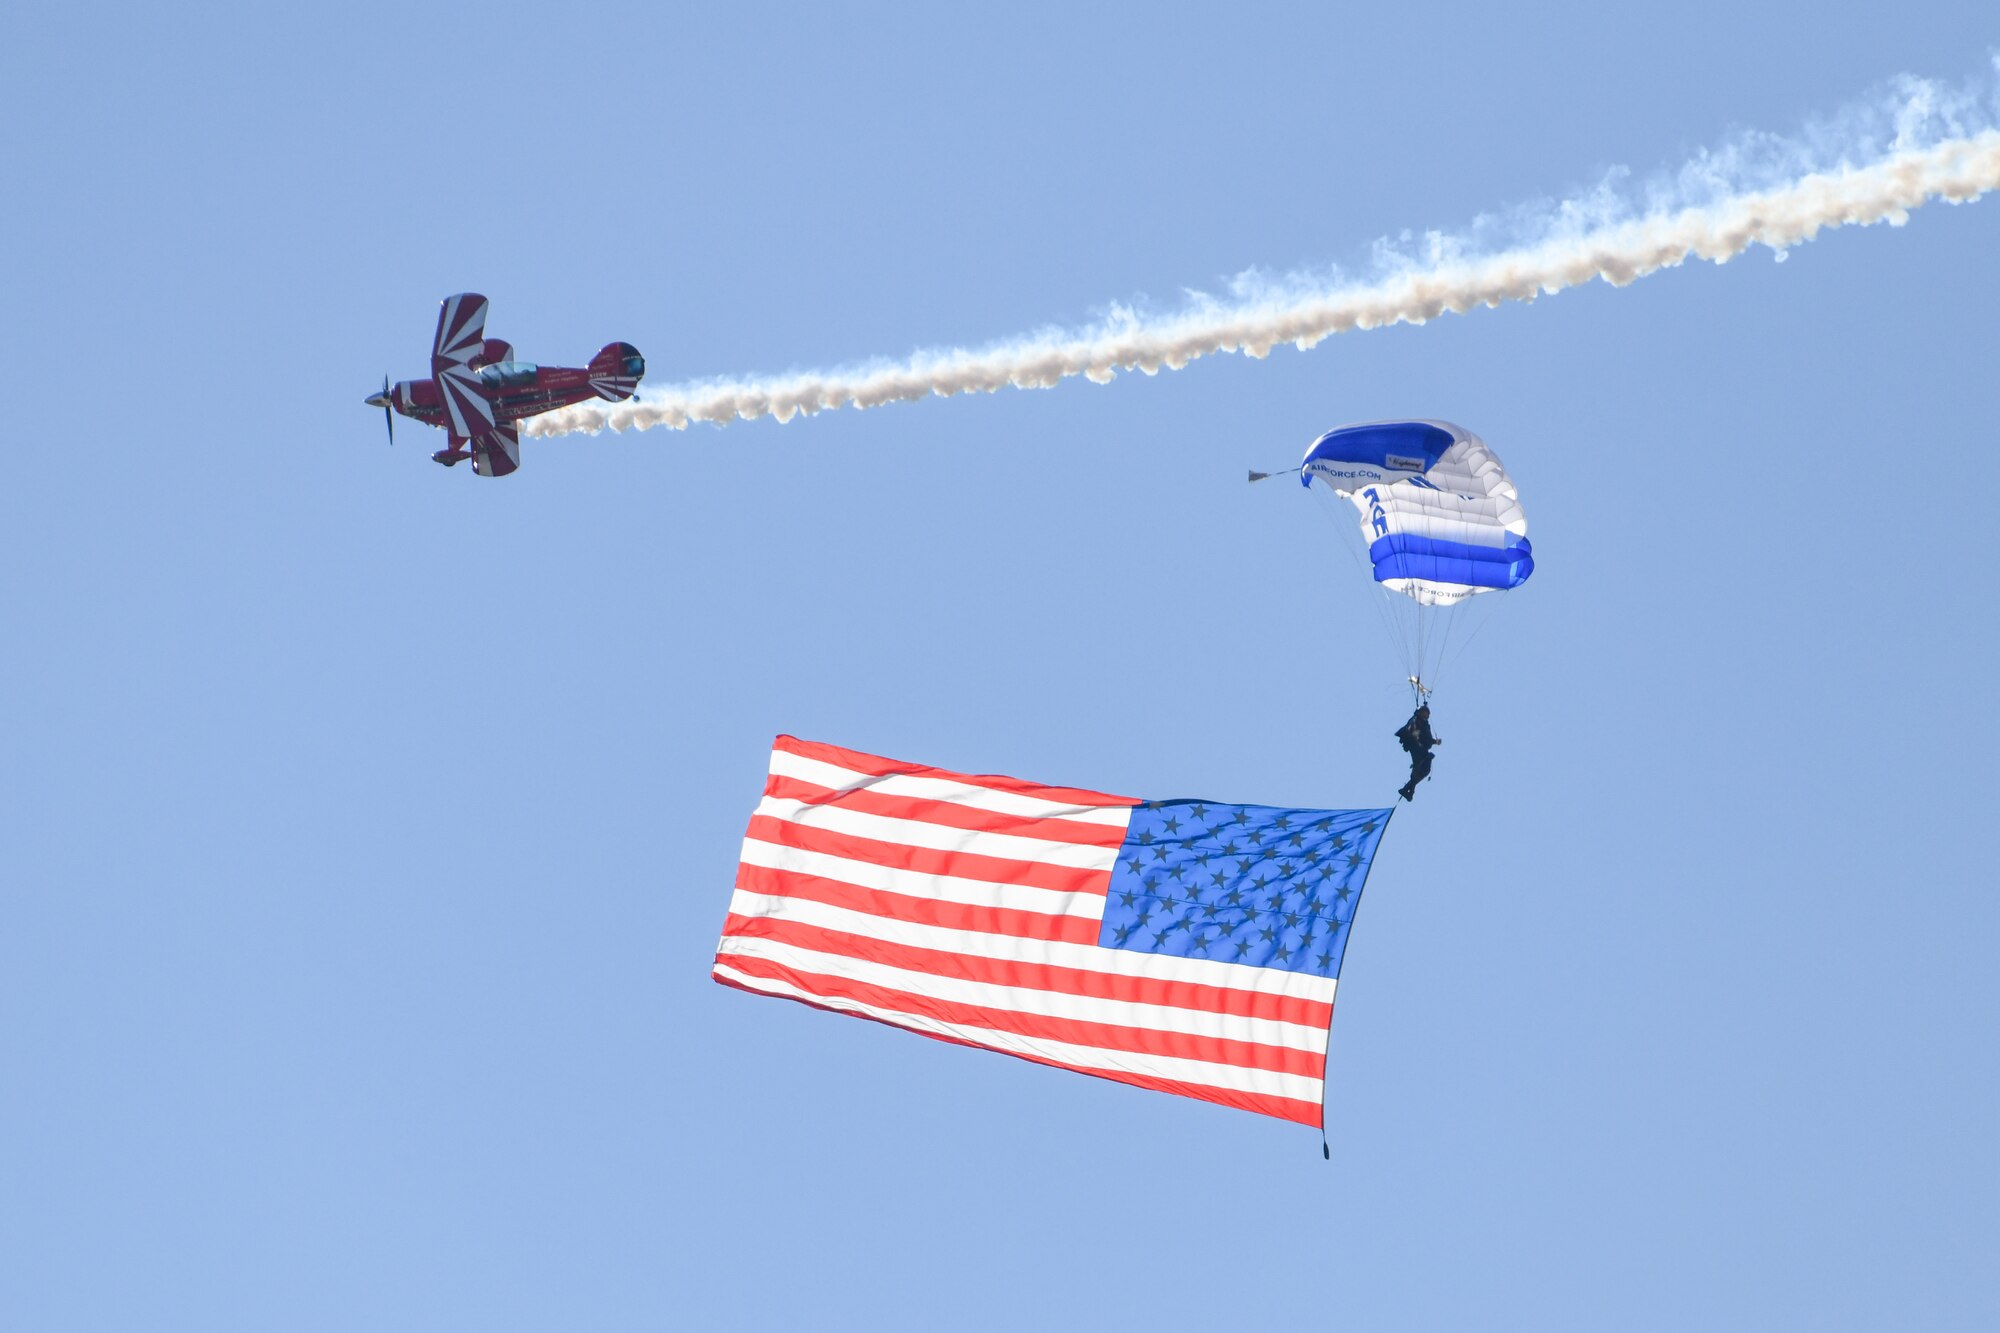 The U.S. Air Force Academy (USAFA) Wings of Blue and a Pitts S2B perform at the Red River Thunder airshow at Altus Air Force Base, Oklahoma, Oct. 1, 2022. The Wings of Blue consists of enlisted service members and cadets from the USAFA. (U.S. Air Force photo by Senior Airman Kayla Christenson)